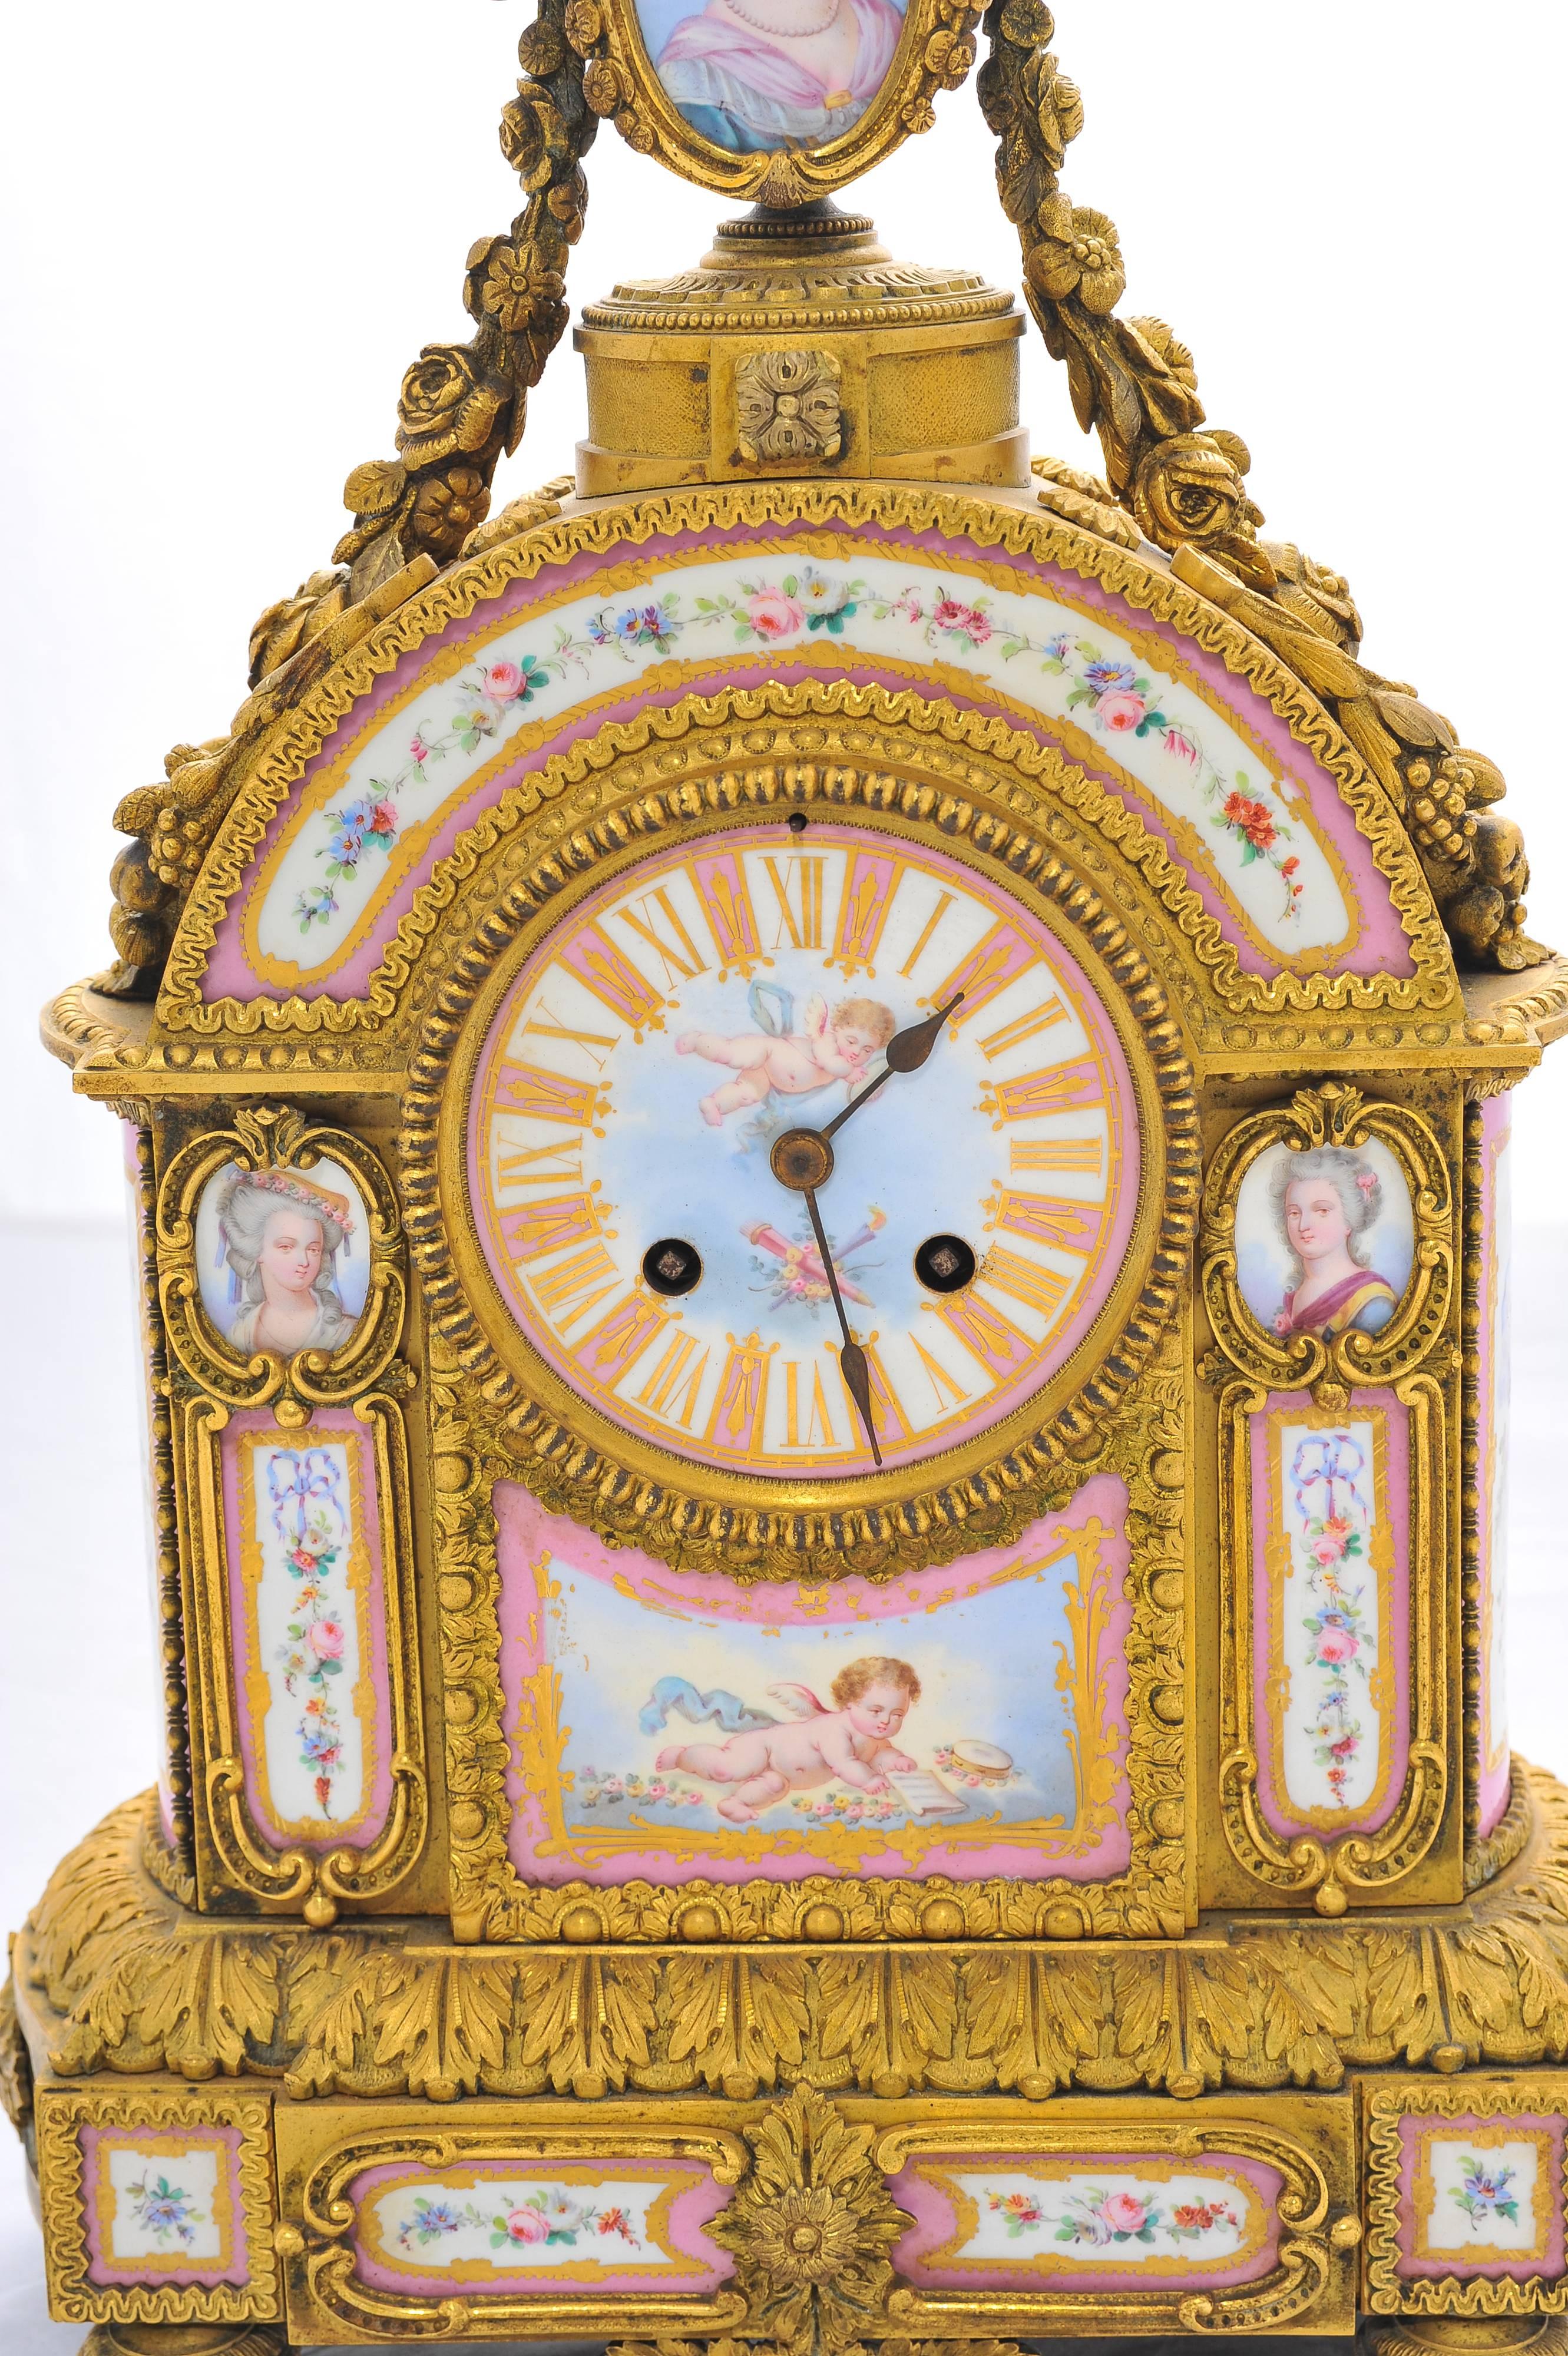 A very pretty 19th century French pink 'Sevres' porcelain and gilded ormolu mantel clock. Having classical foliate and swag decoration surrounding the pink porcelain plaques which depict classical women, cherubs and flowers. The porcelain face with